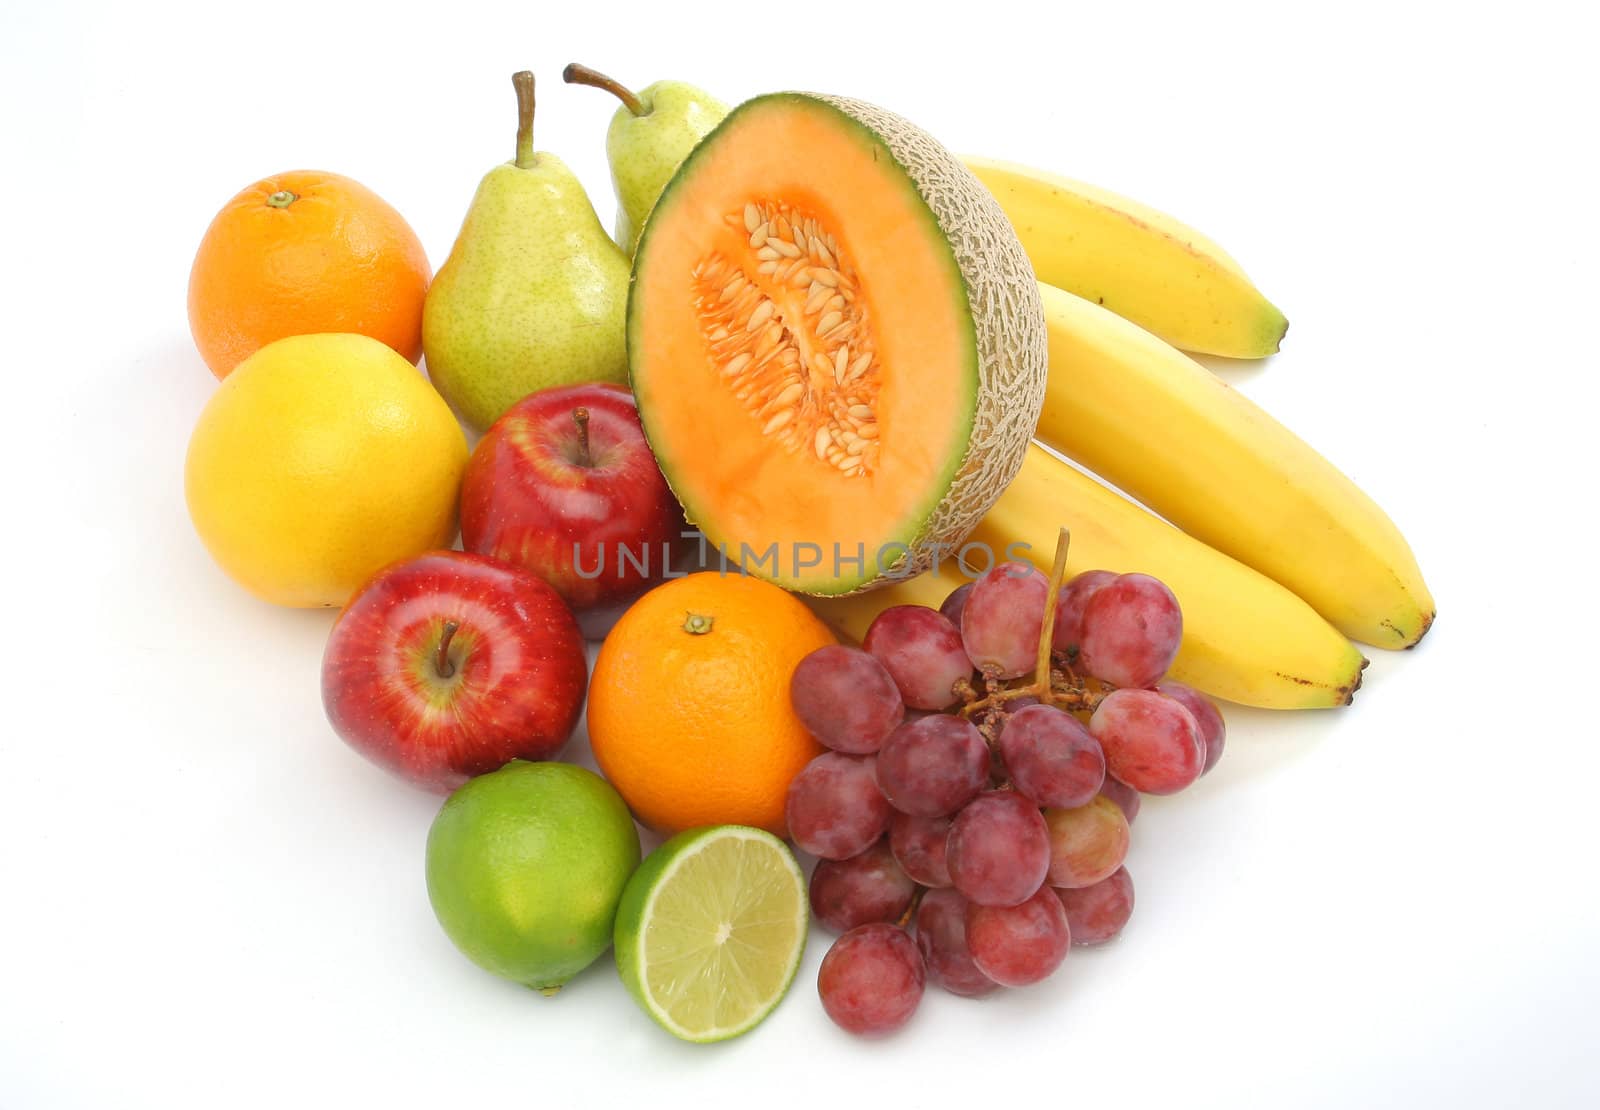 Colorful group of fresh fruits by Erdosain